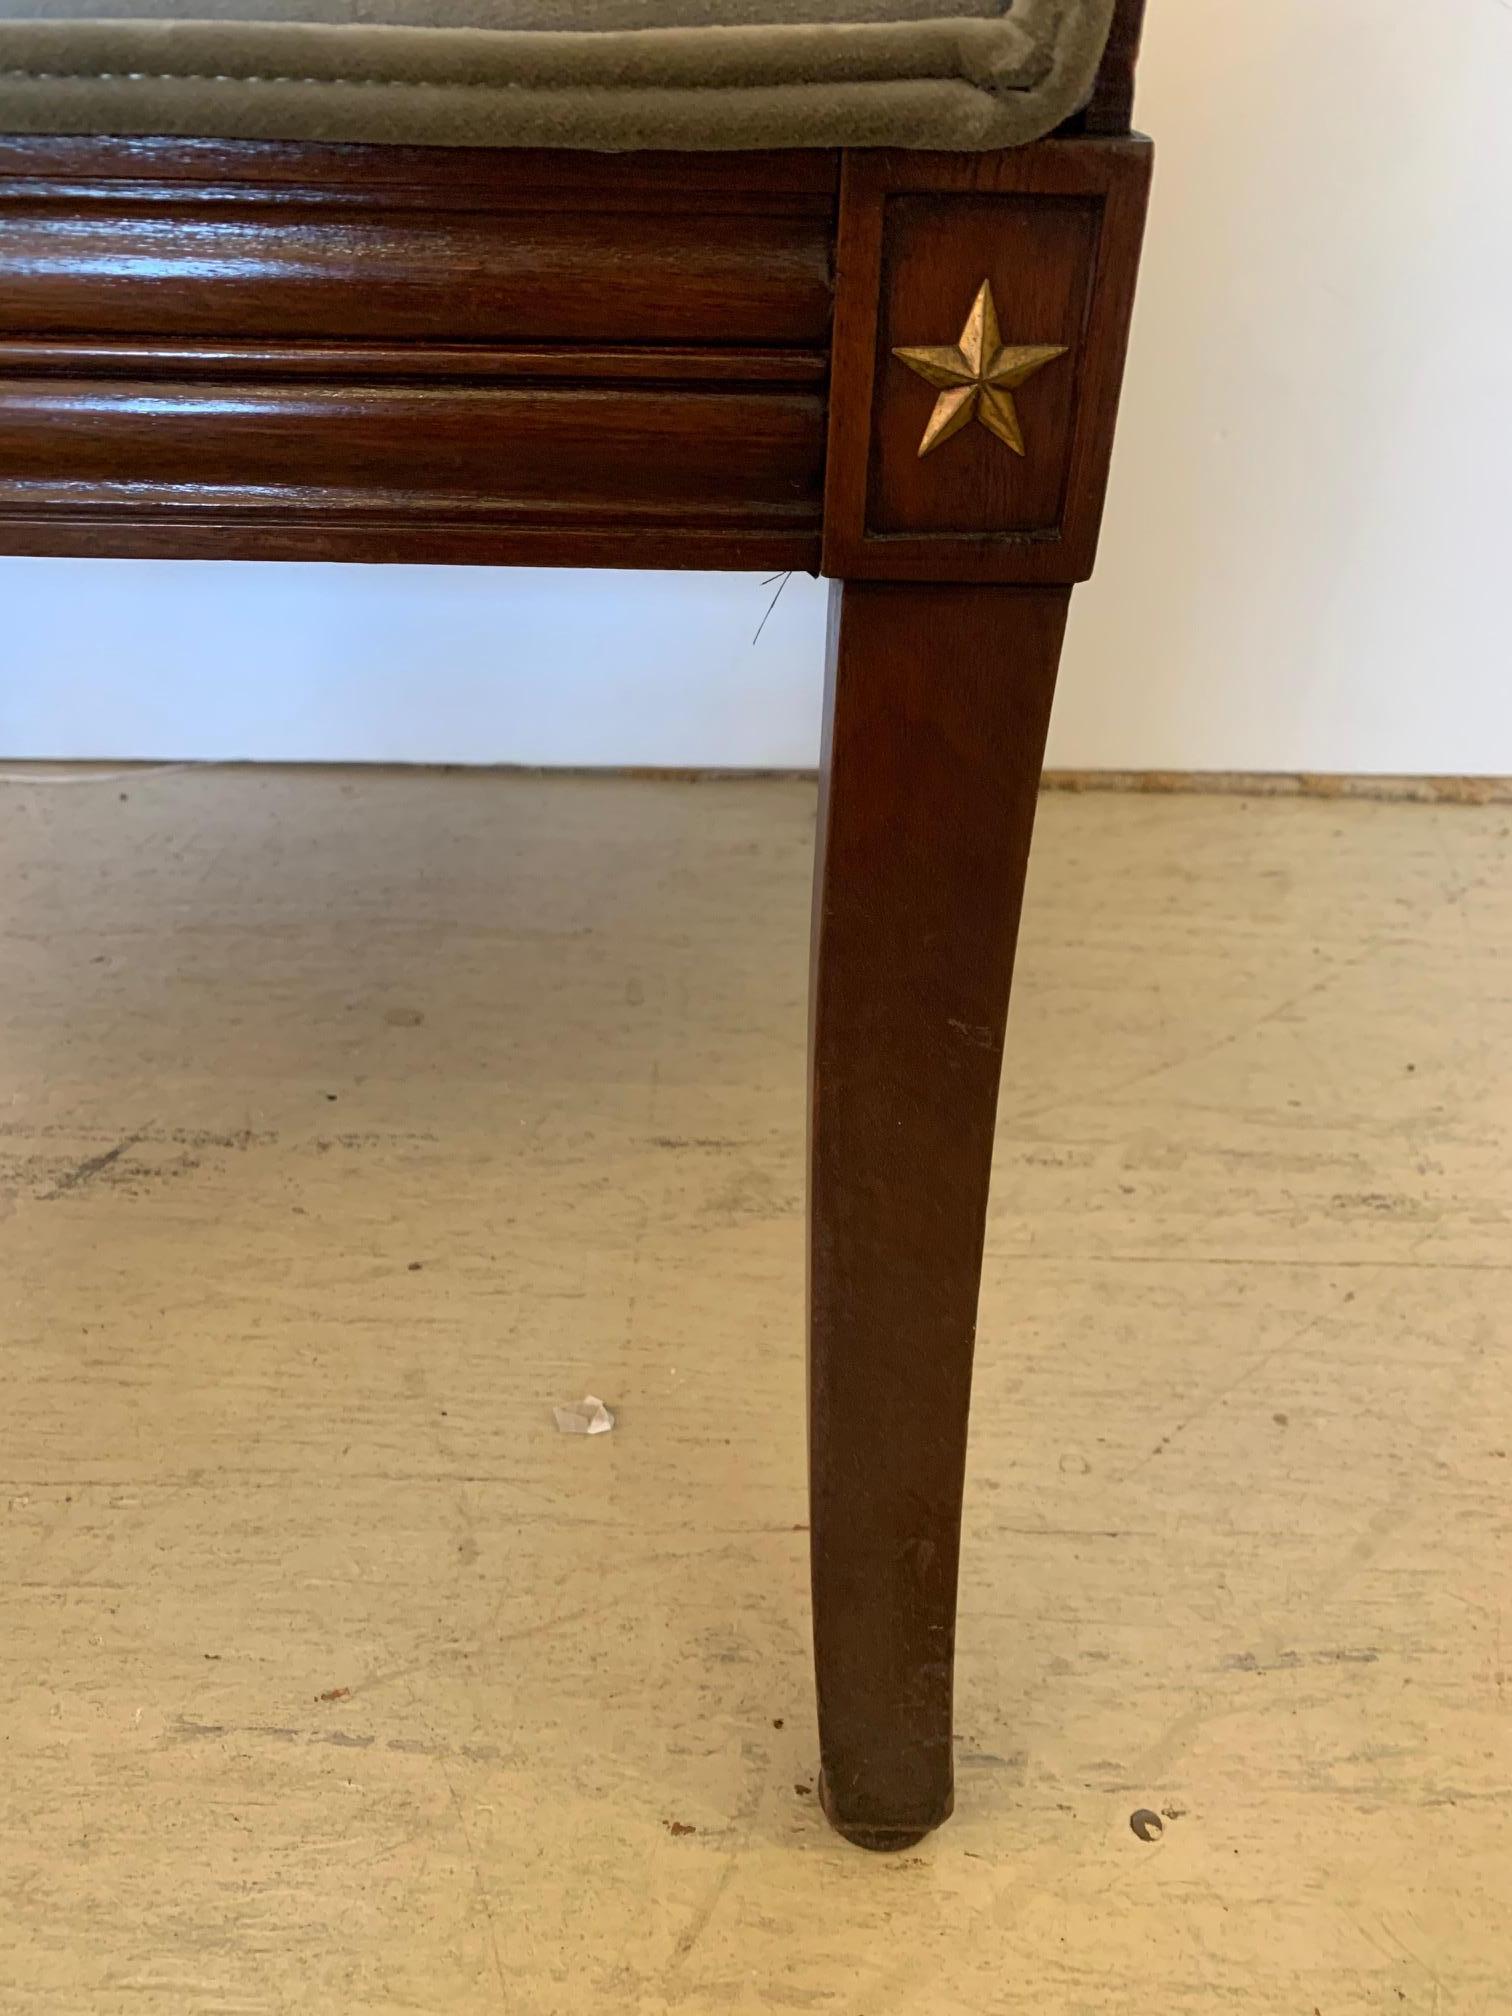 Elegant 19th Century Mahogany Neoclassical Regency Style Arm Chair with Stars For Sale 6